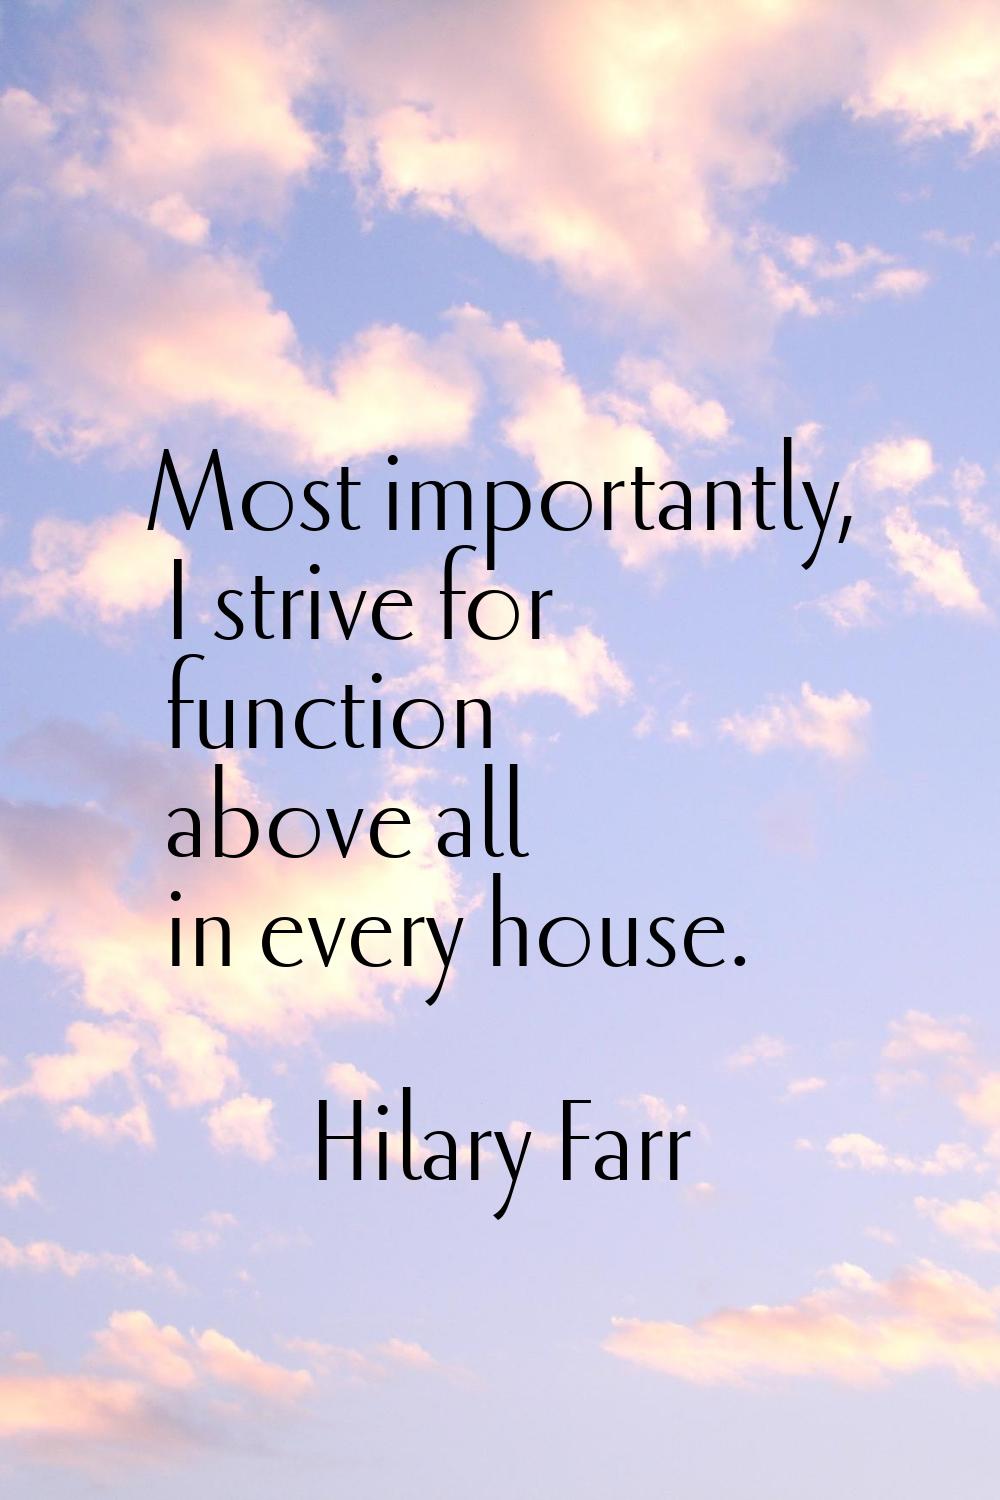 Most importantly, I strive for function above all in every house.